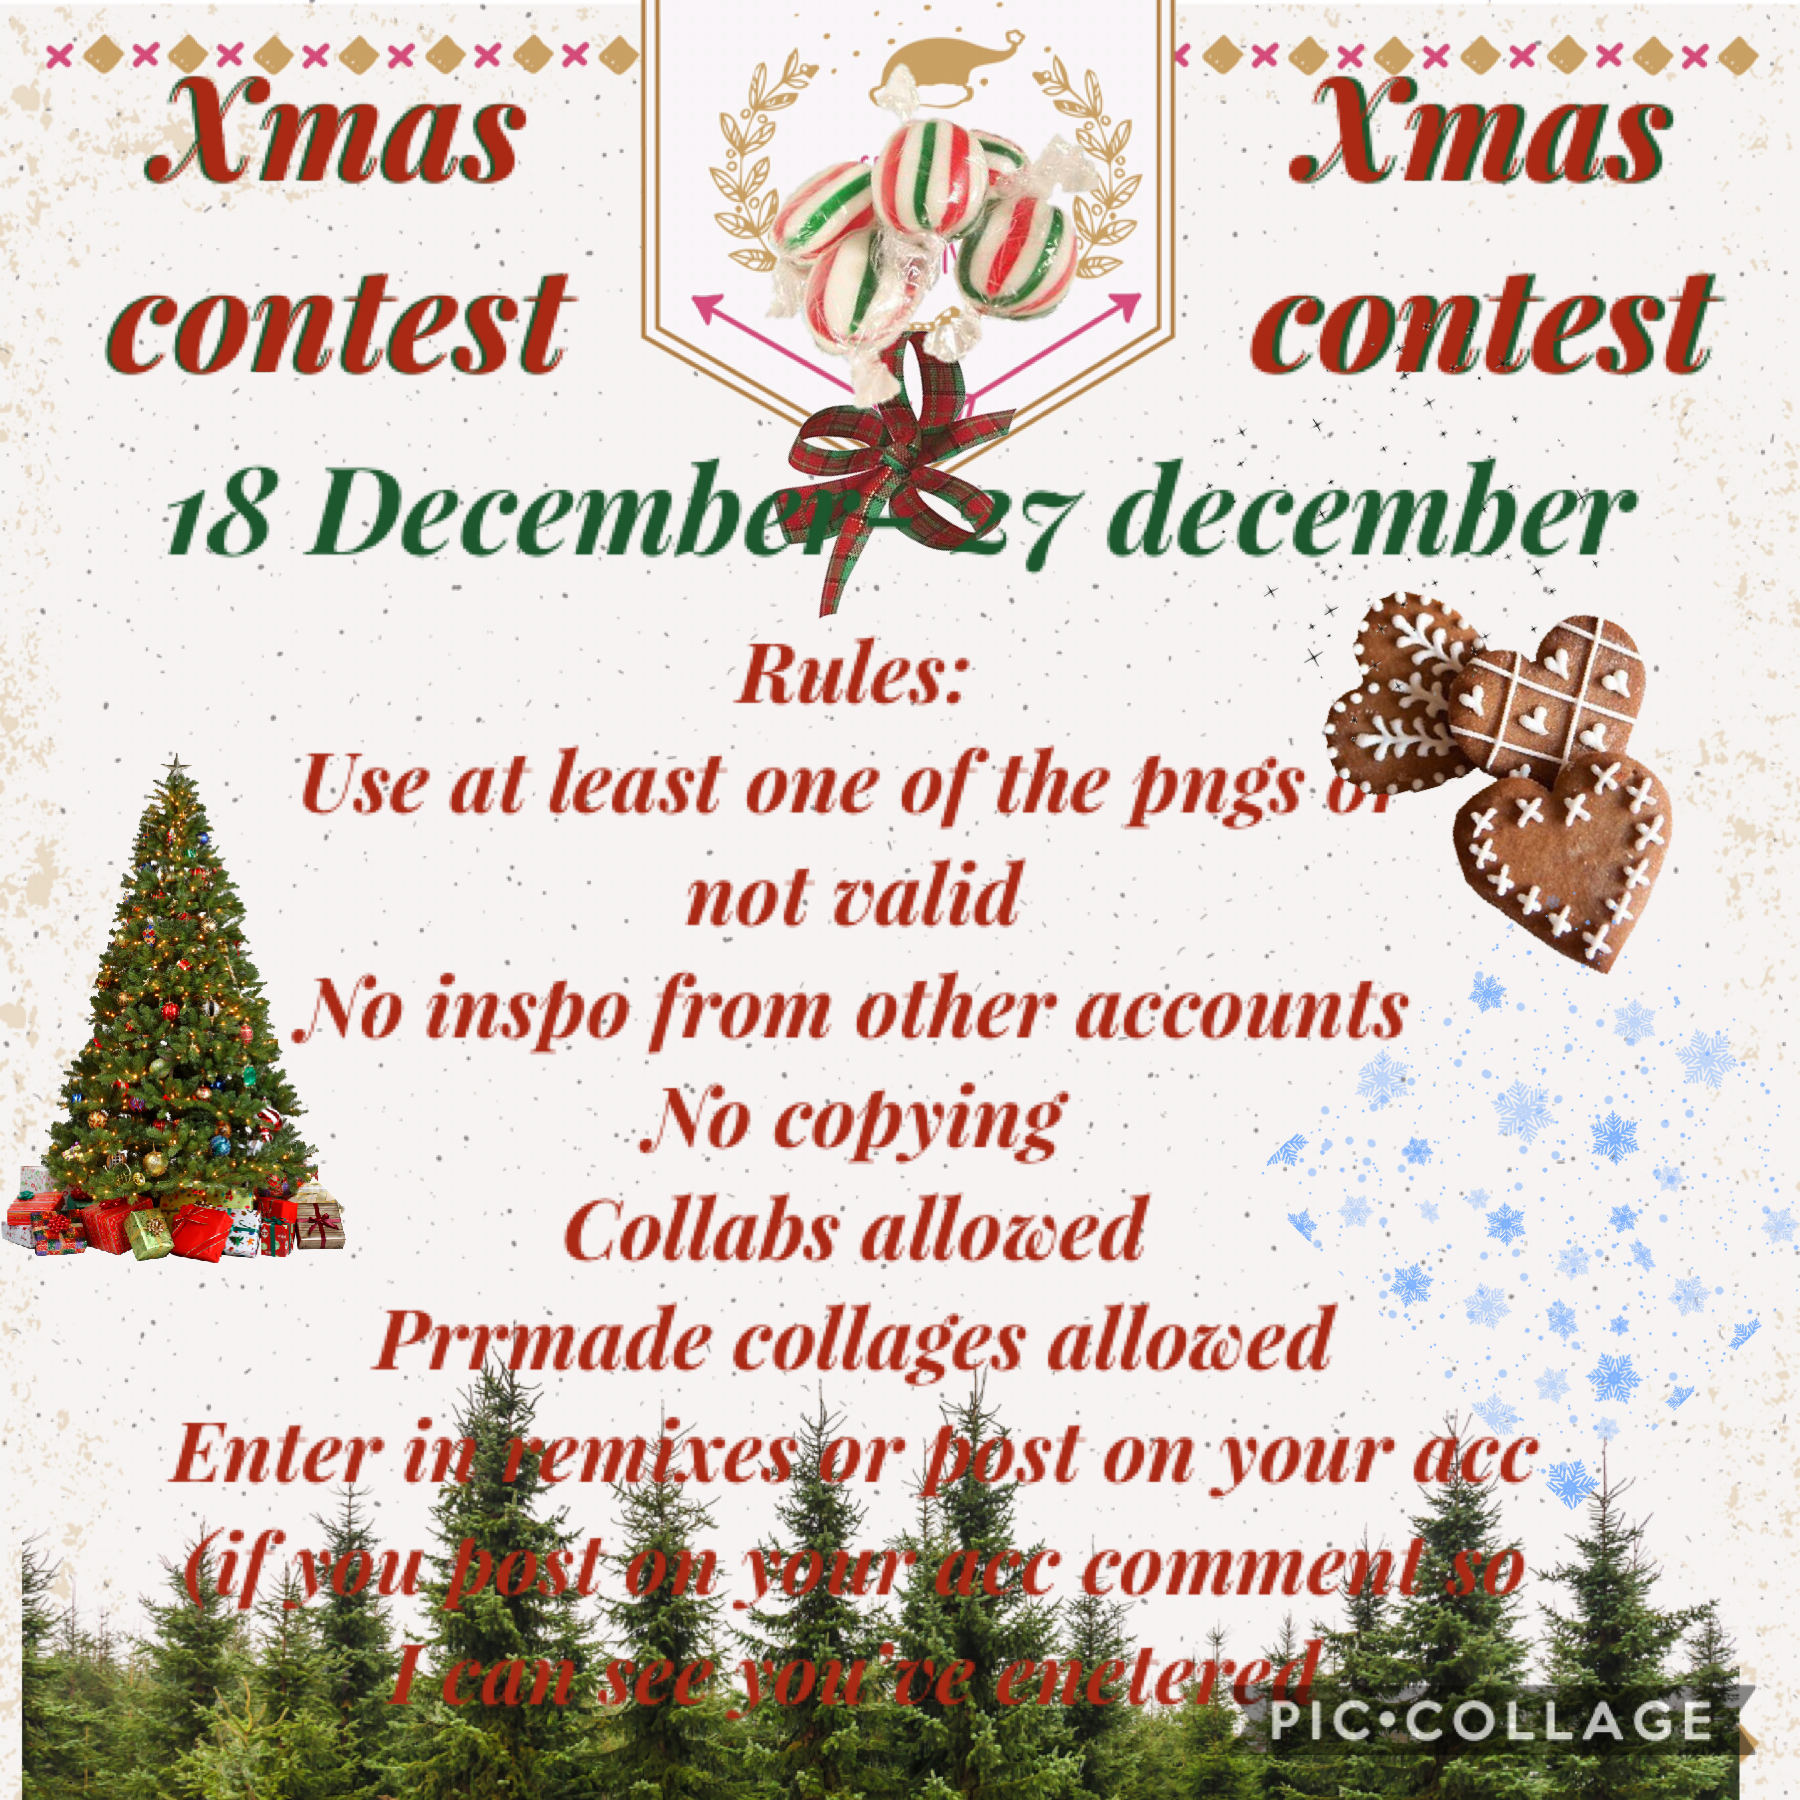  🎄 TAP🎄 
MERRY XMAS PICCOLLAGE!!
Enjoy this contest 😉 please also remix winter png packs on my other posts! Thank you ❄️ 
Xxacidlqve 